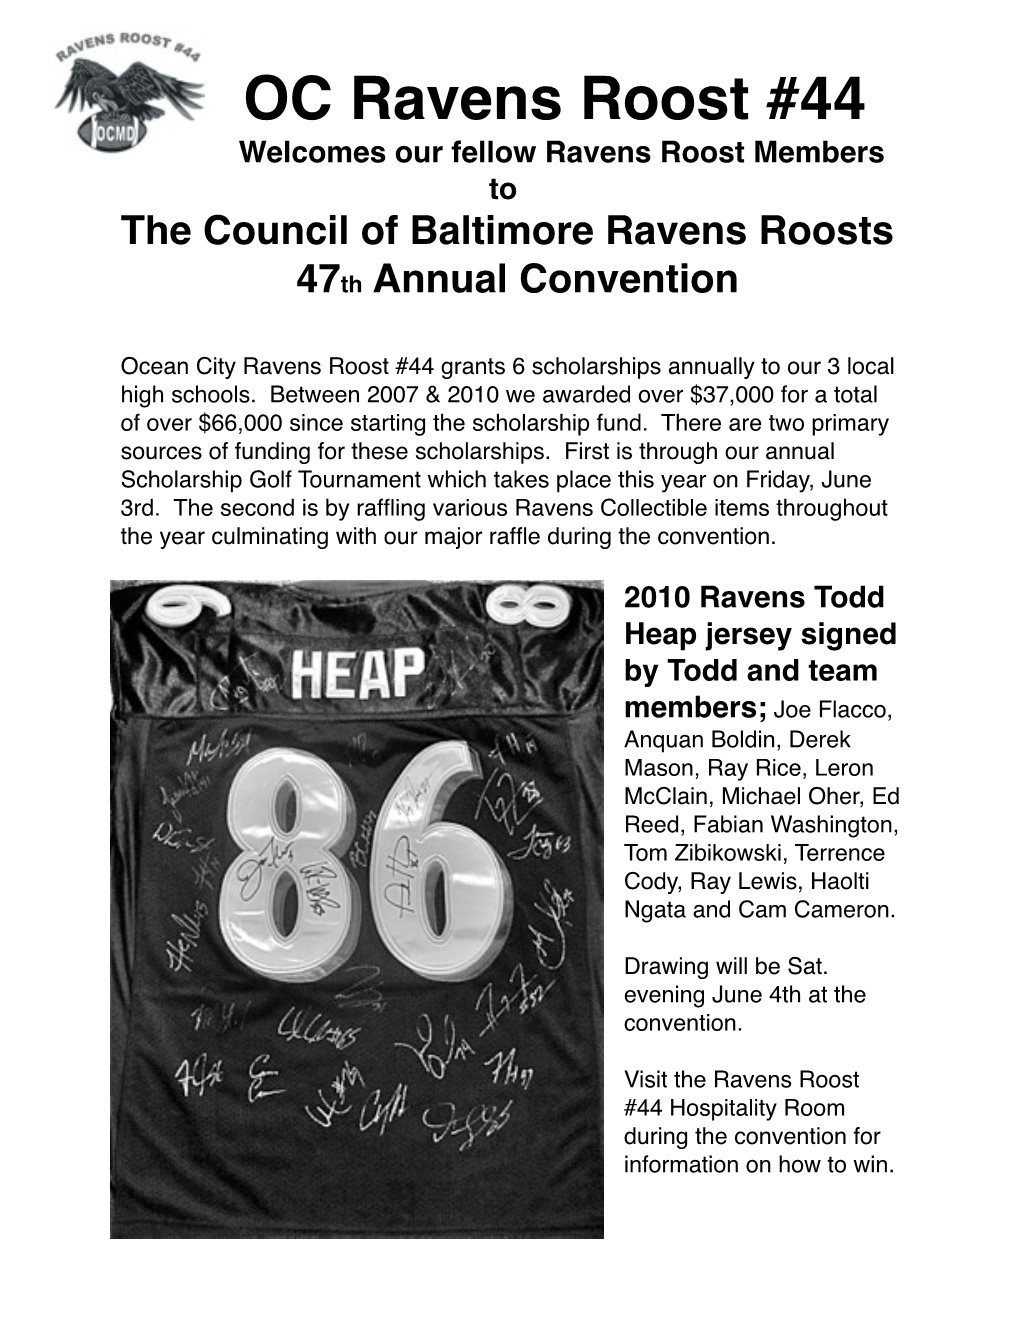 OC Ravens Roost #44 Welcomes Our Fellow Ravens Roost Members to the Council of Baltimore Ravens Roosts 47Th Annual Convention